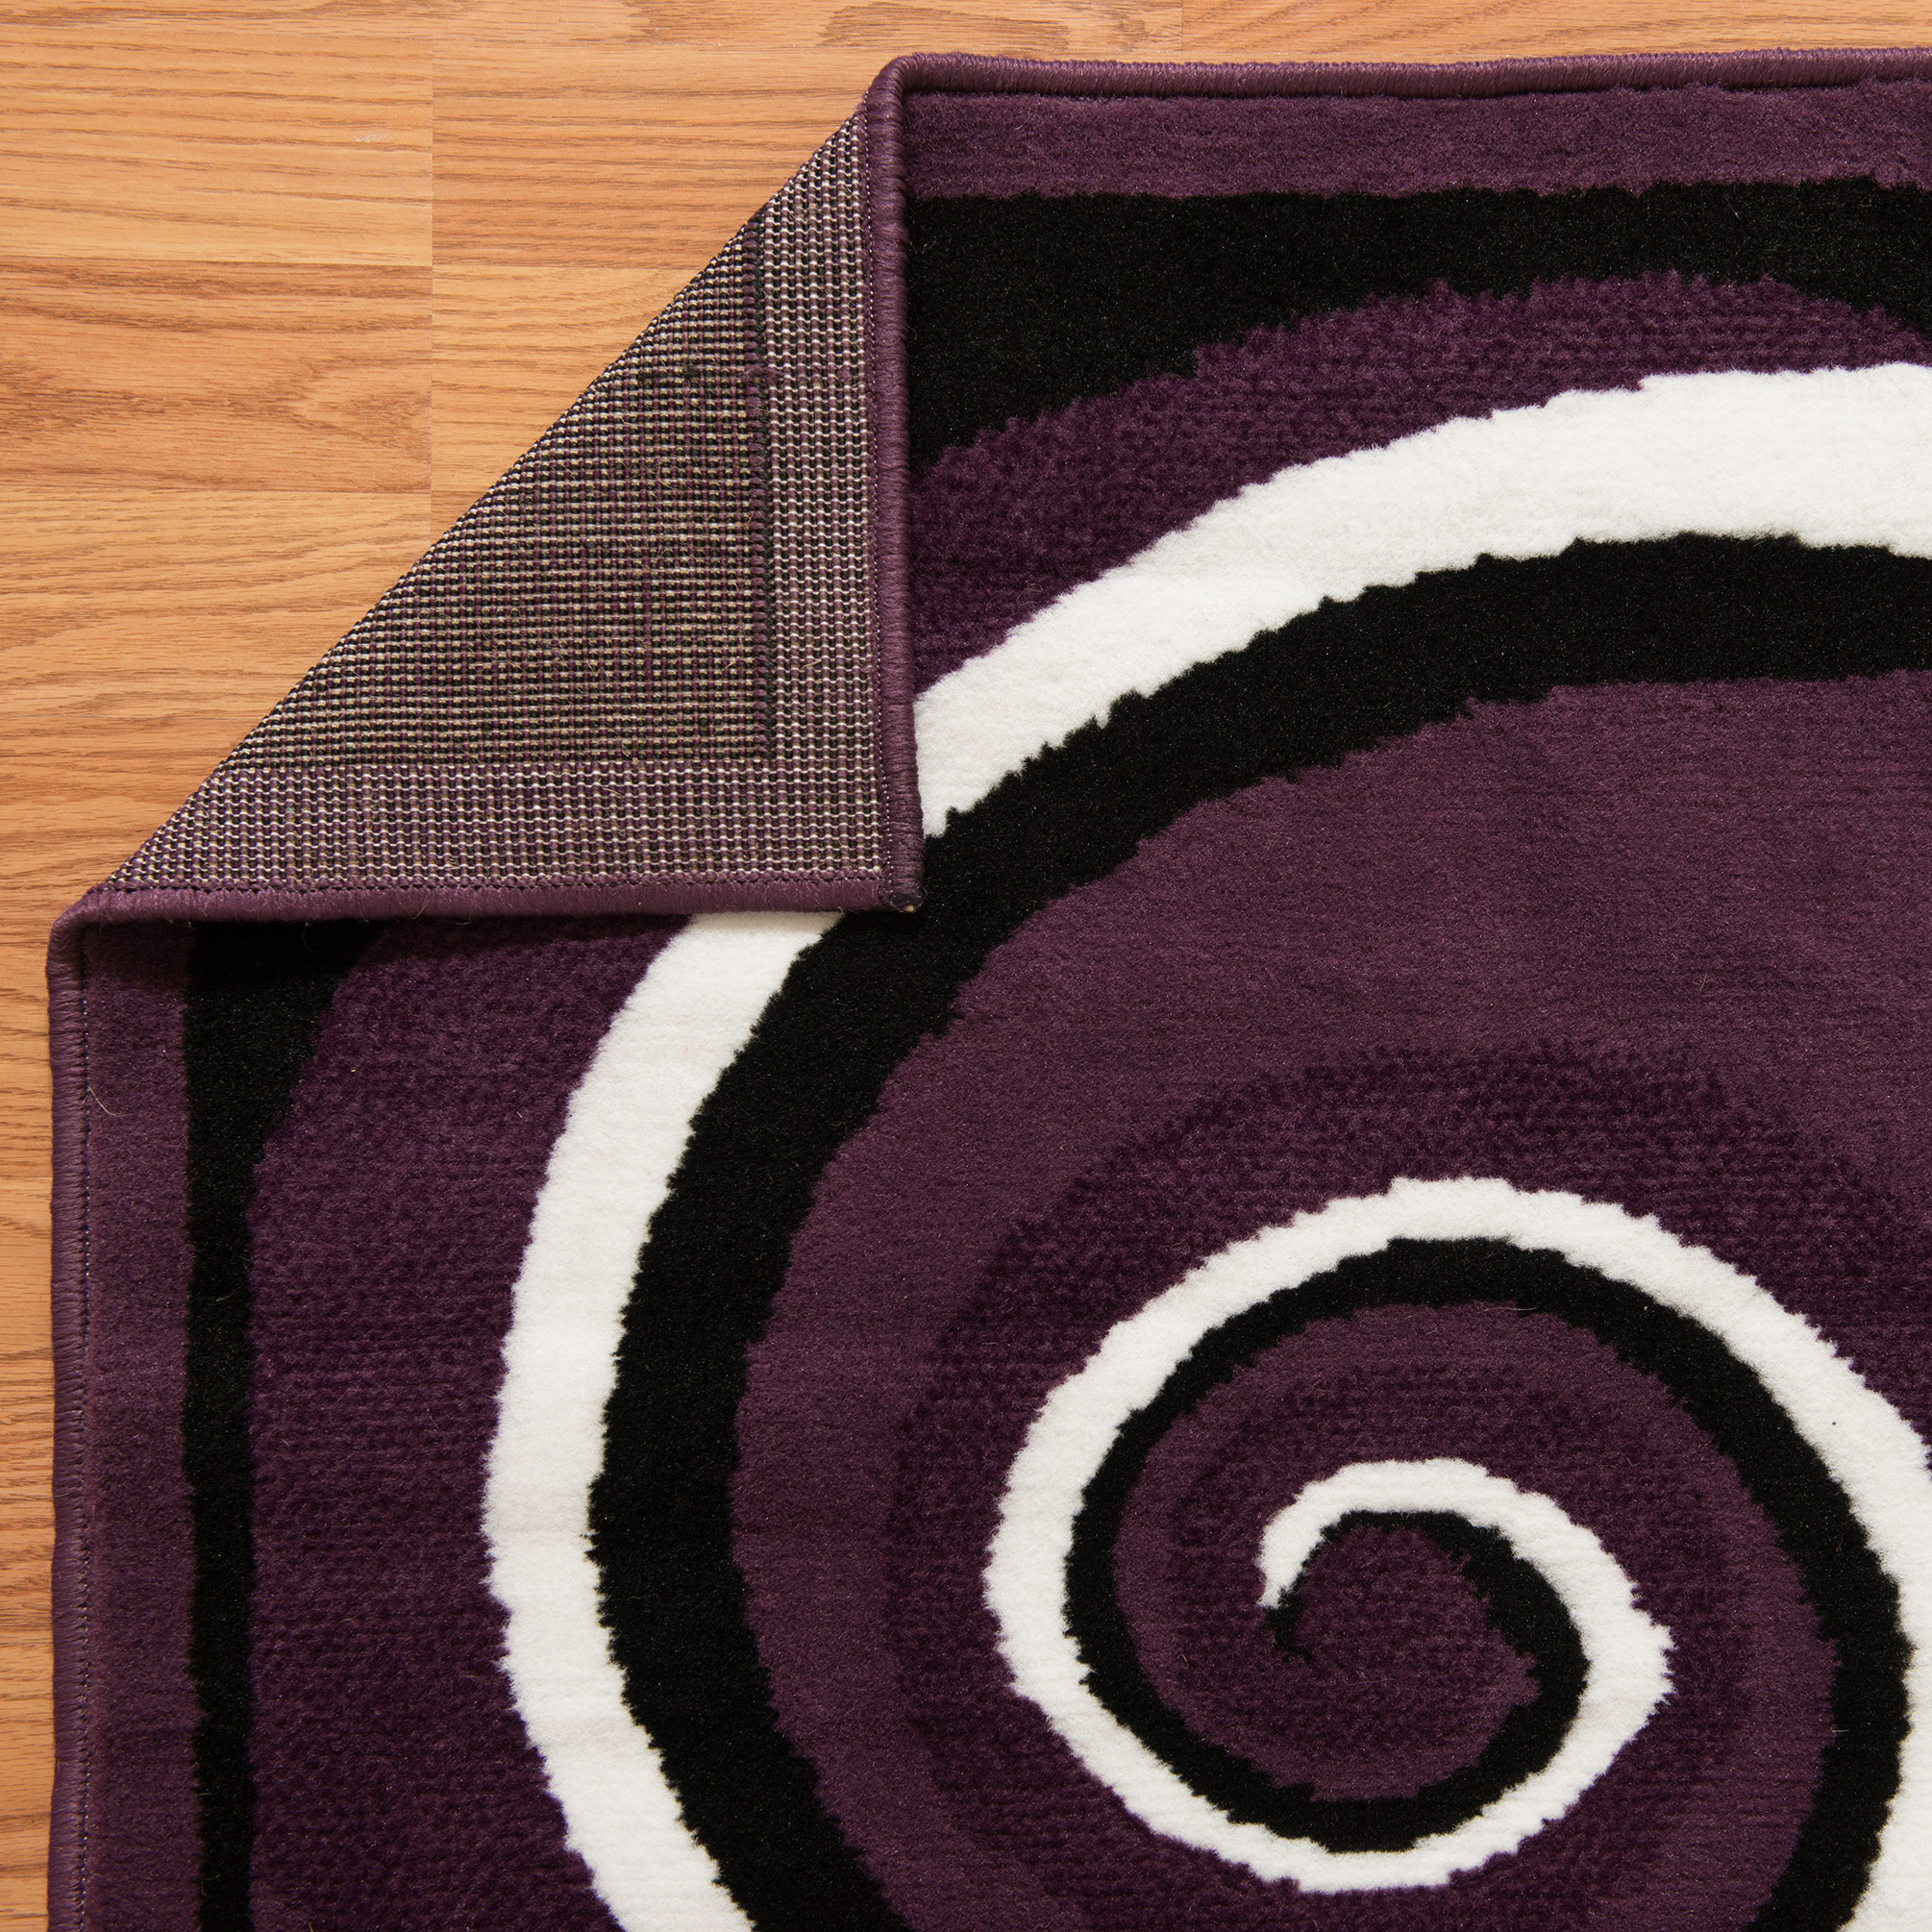 Designer Home Soft Transitional Indoor Modern Area Rug Curvy Swirls  - Actual Size: 1' 11" x  3' 3" Rectangle (Plum) - image 4 of 5